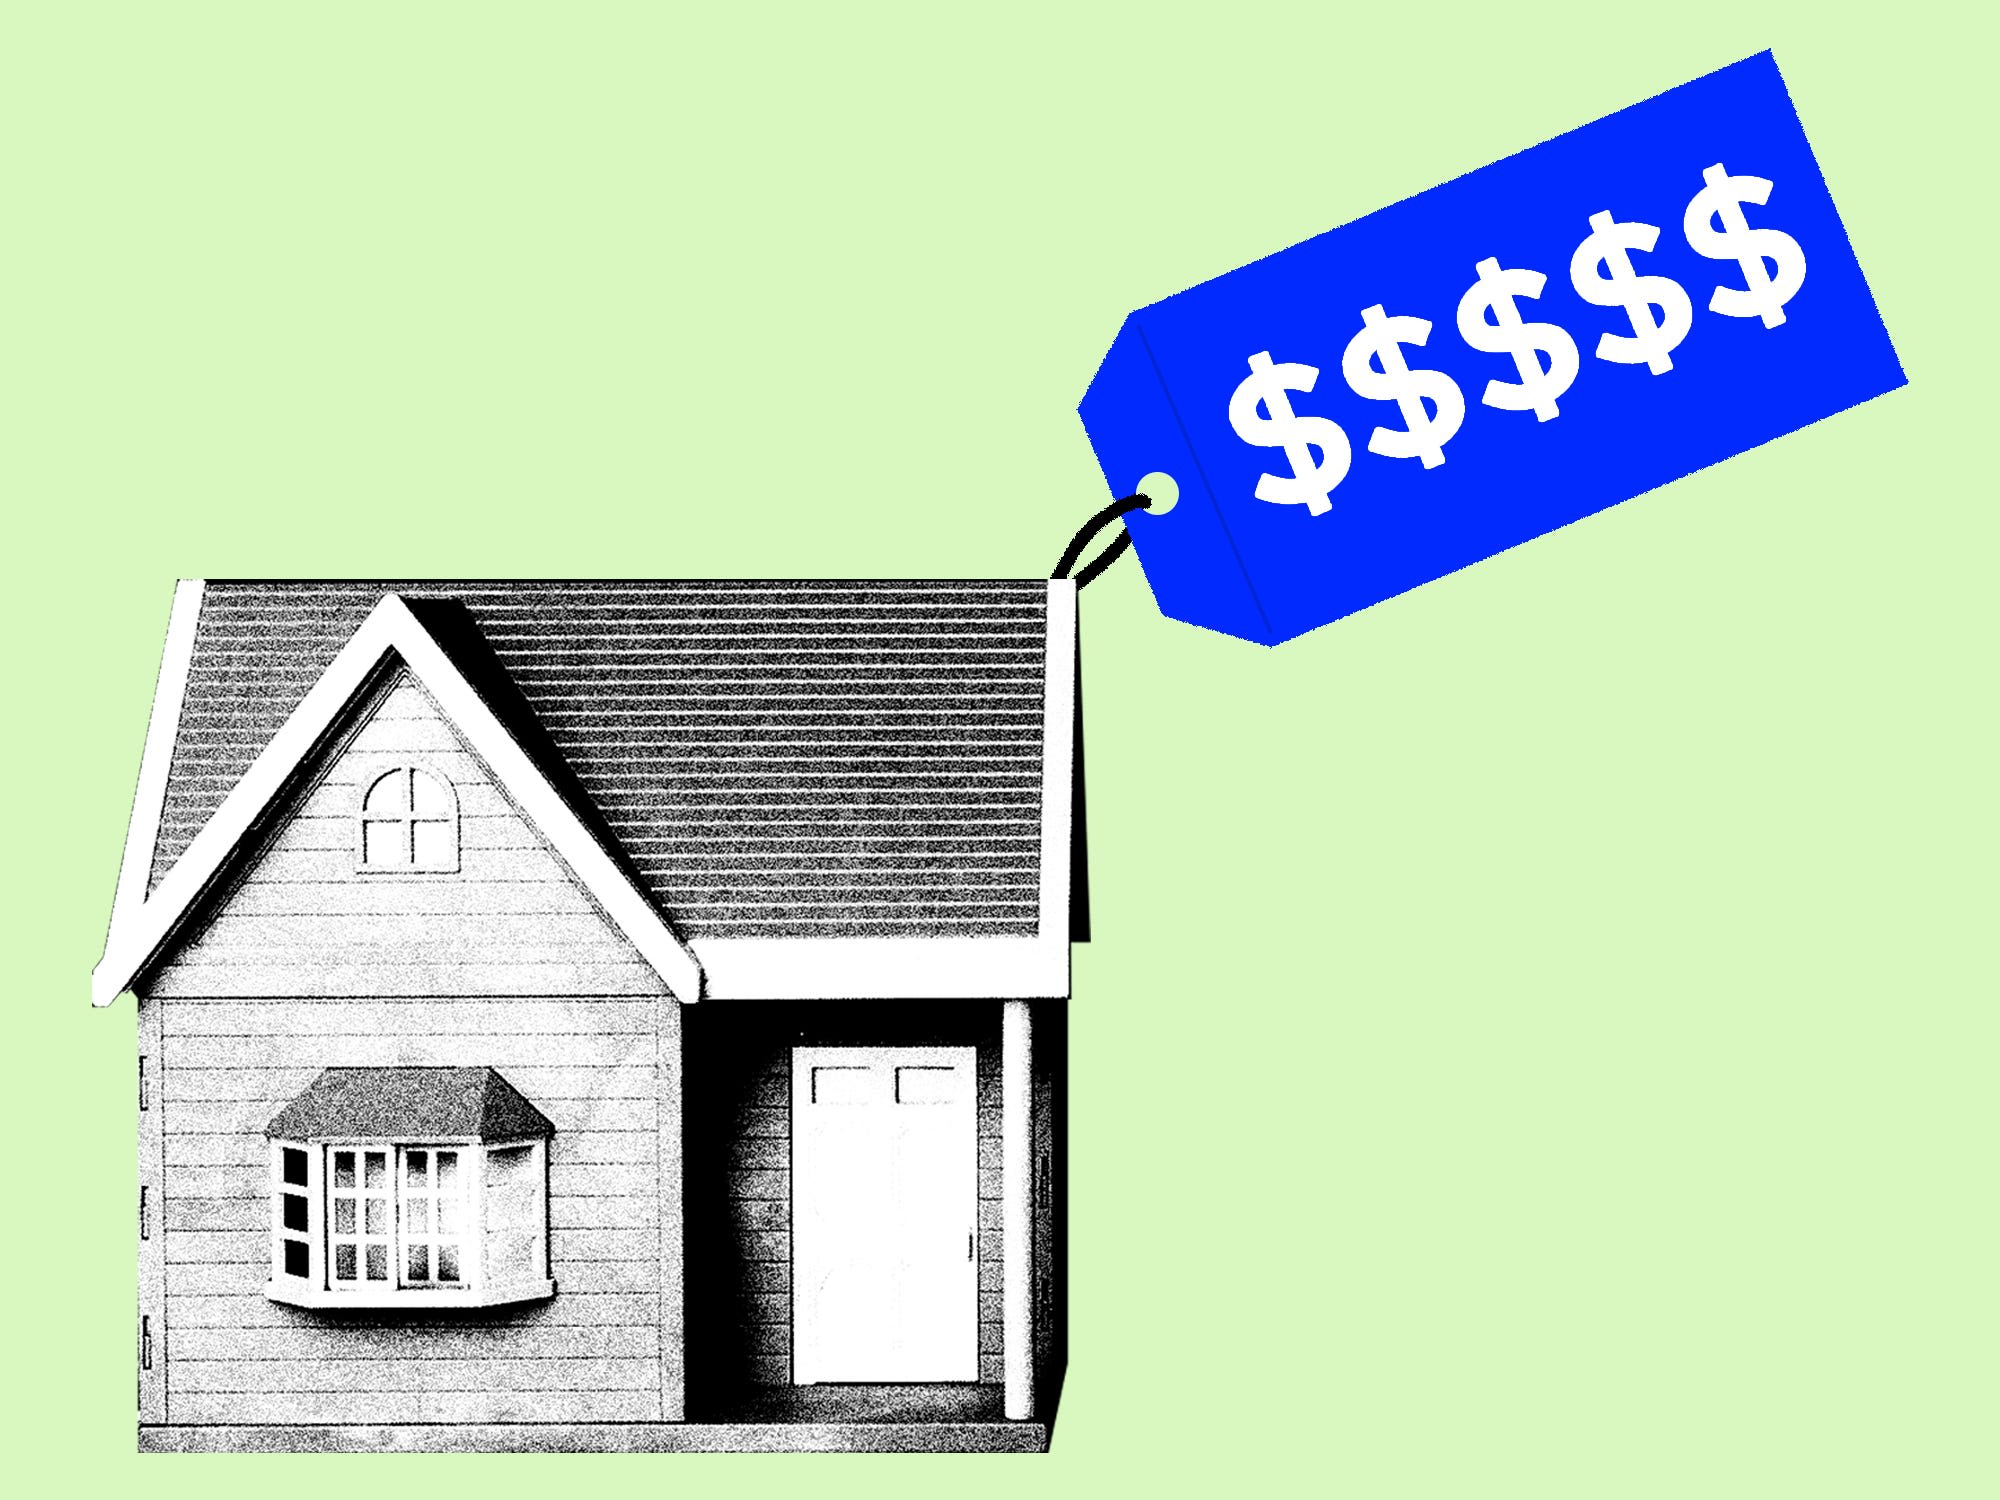 Buying a house gets even more expensive